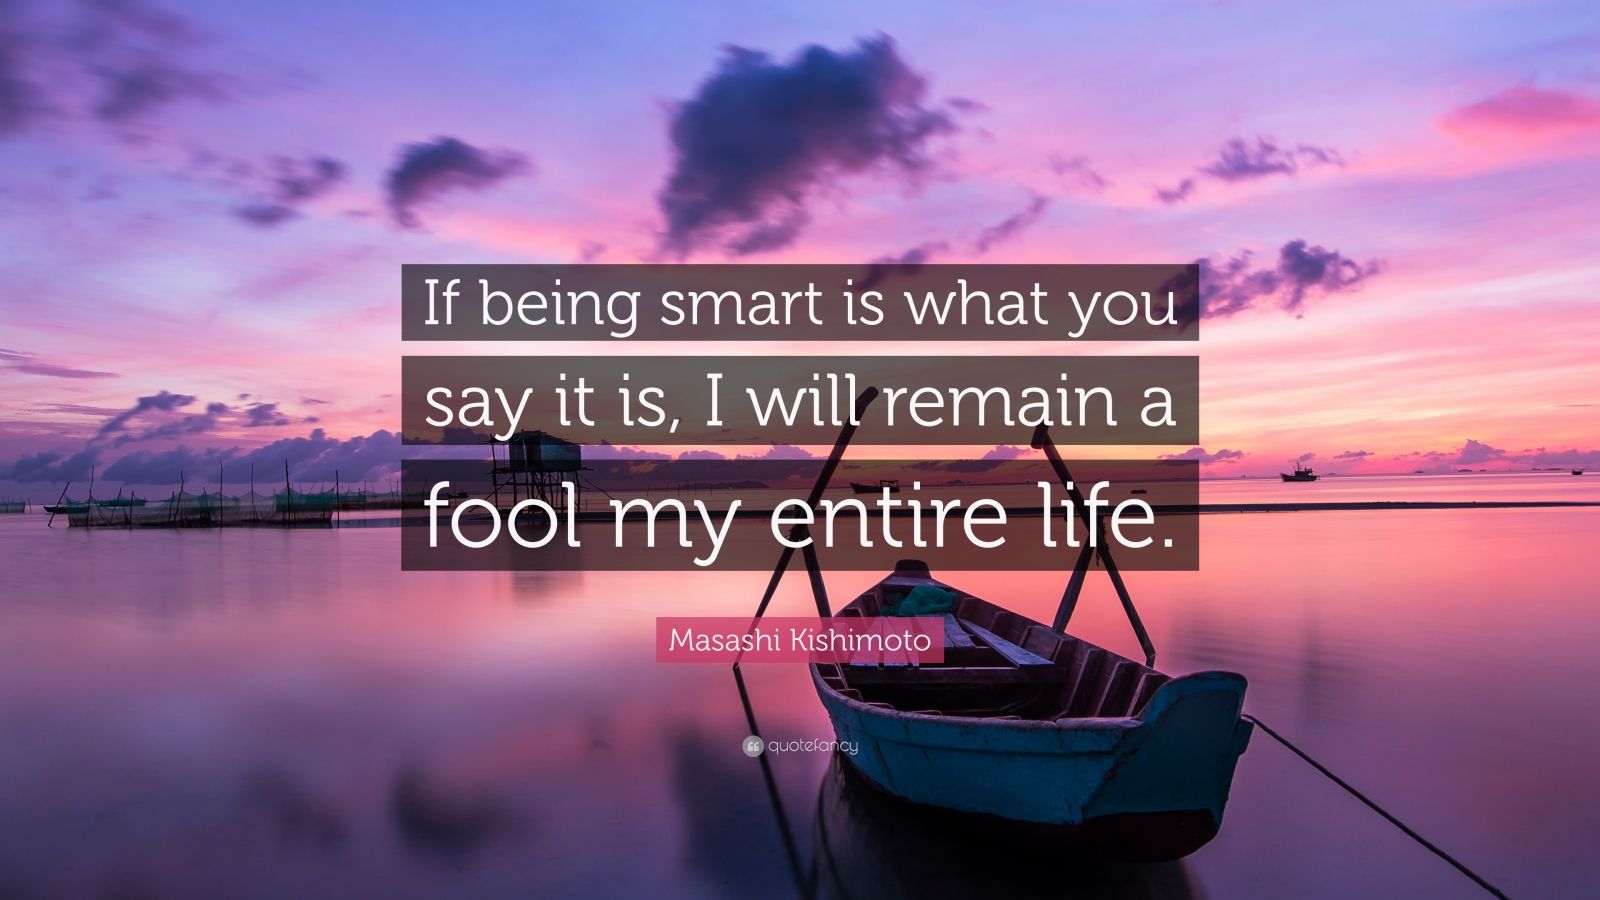 Masashi Kishimoto Quote “If being smart is what you say